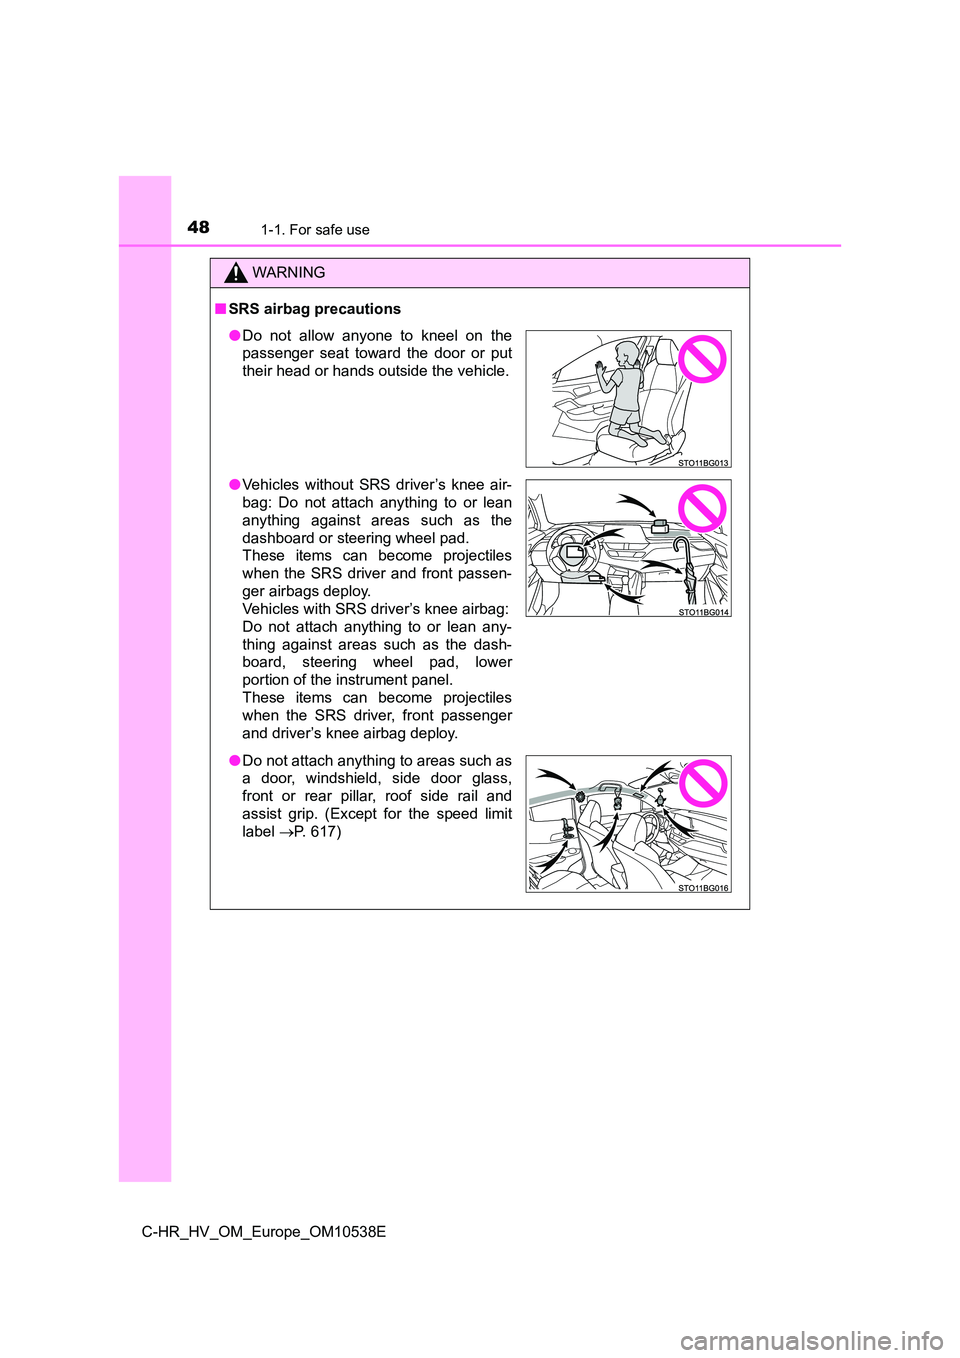 TOYOTA C_HR HYBRID 2017  Owners Manual 481-1. For safe use
C-HR_HV_OM_Europe_OM10538E
WARNING
■SRS airbag precautions
●Do not allow anyone to kneel on the 
passenger seat toward the door or put 
their head or hands outside the vehicle.